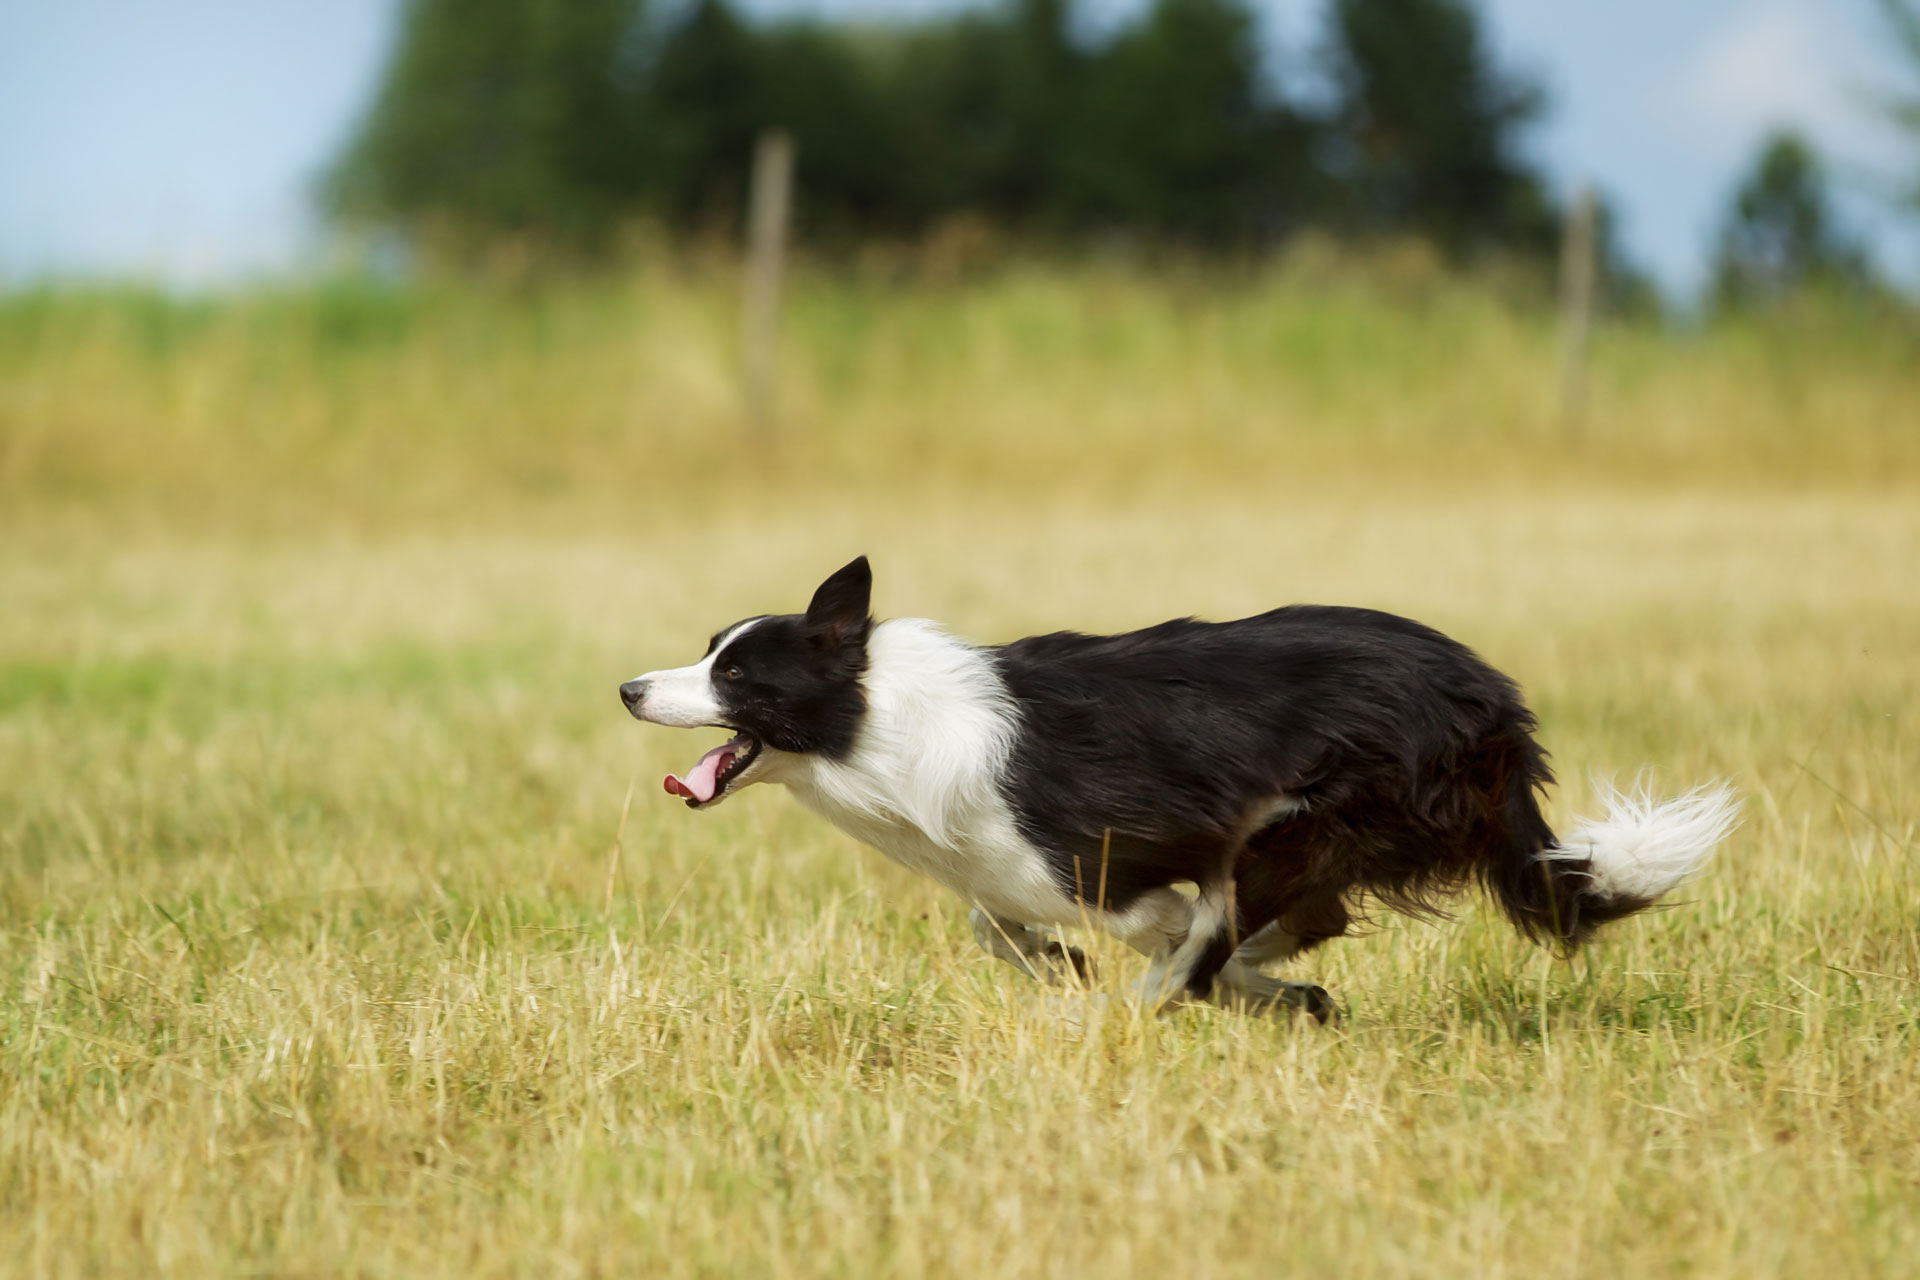 black and white outdoor dog running away through a field of grass